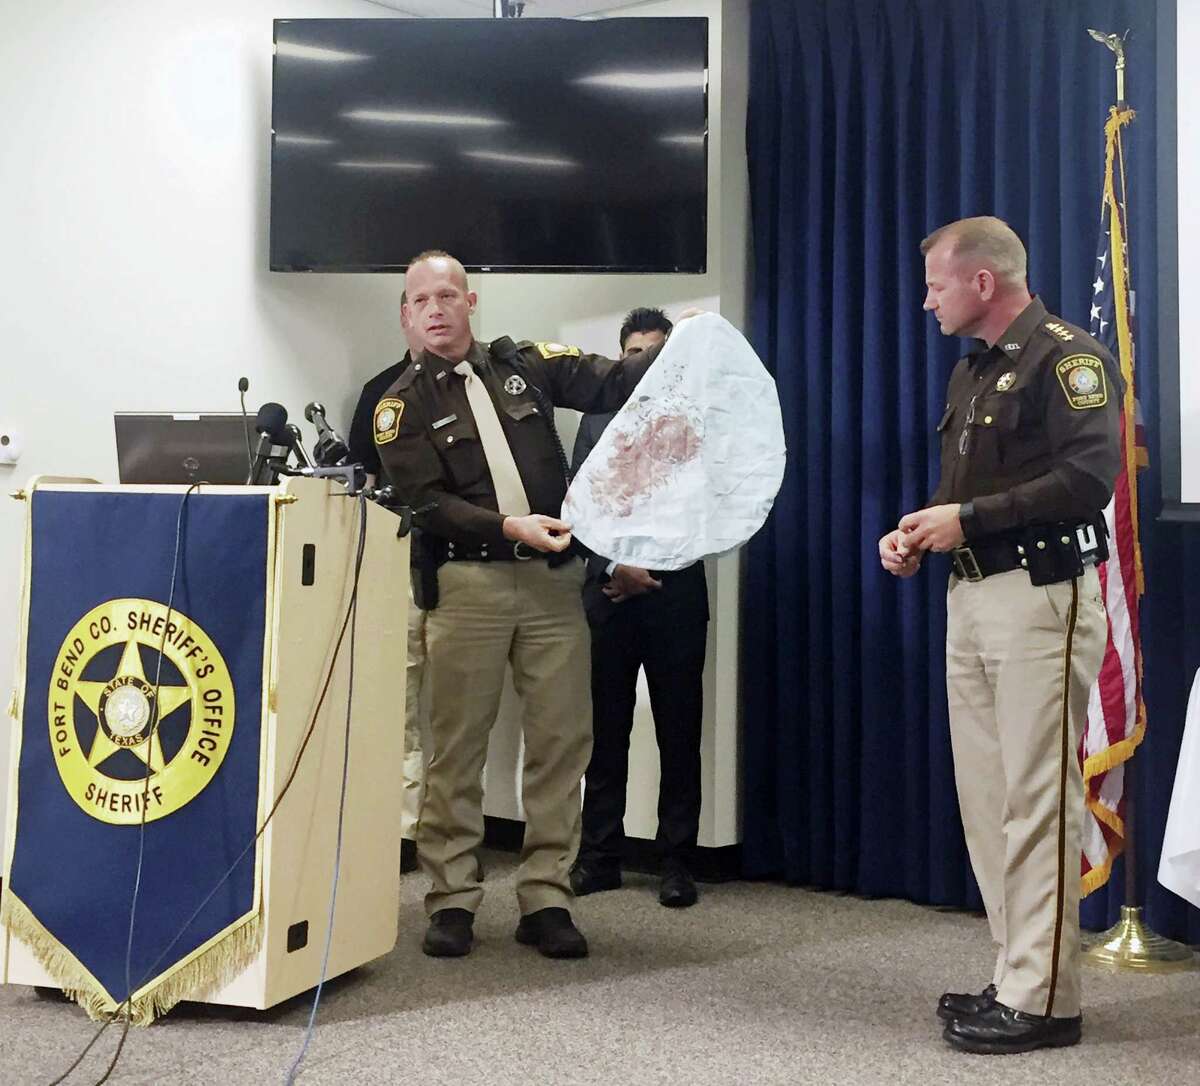 Deputy Danny Beckworth, who investigated the crash site, displays part of a defective airbag believed to have killed 17-year-old Huma Hanif during a news conference April 7 in Houston. The brother of a 17-year-old Texas girl who was killed last week when an exploding Takata air bag sent a shard of metal into her neck said he never received a recall notice about his 2002 Honda Civic.